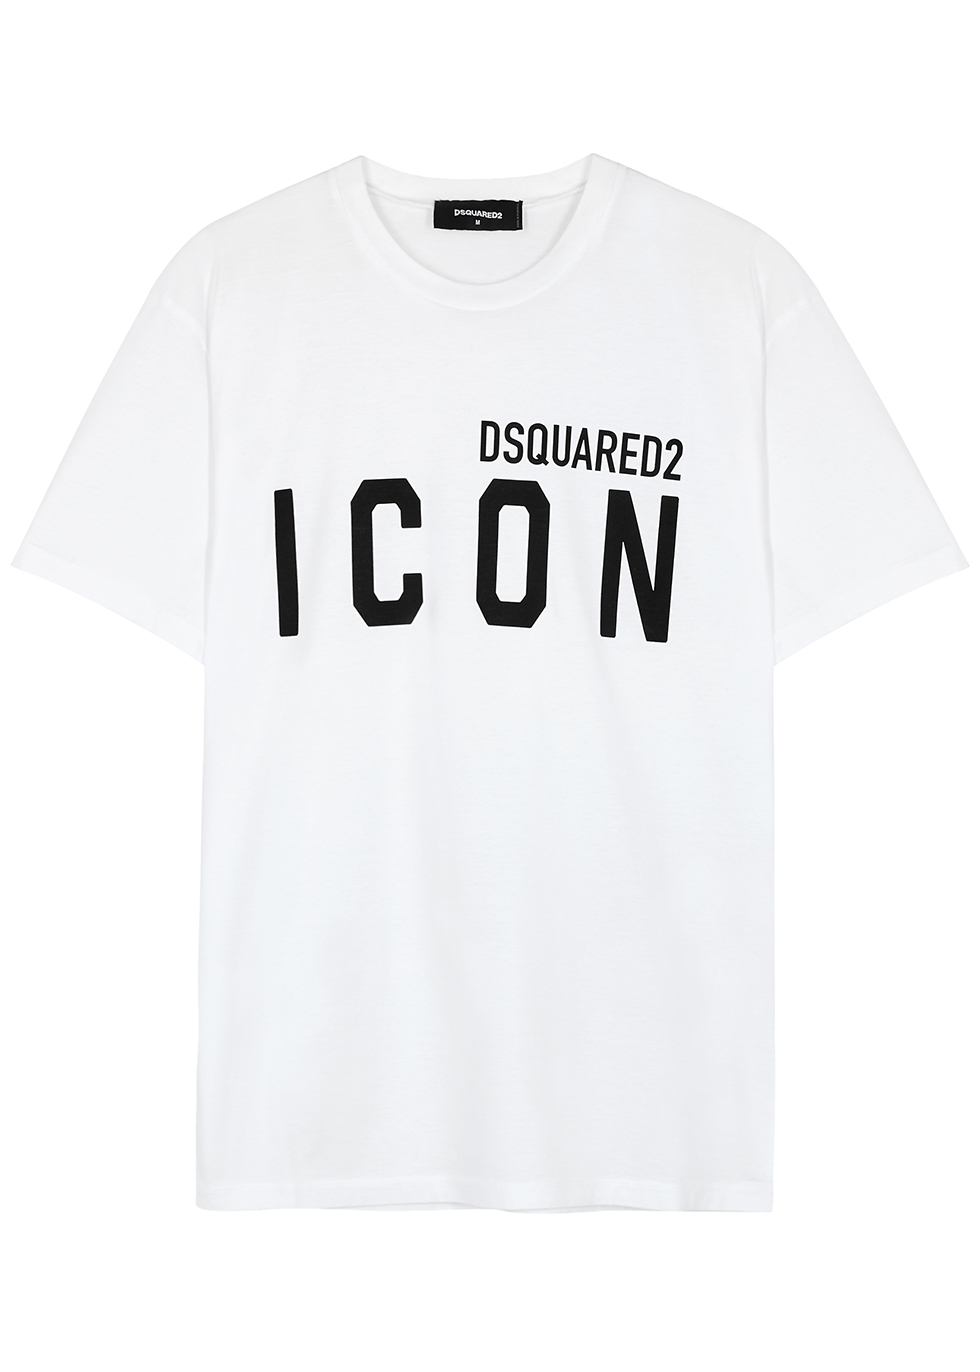 tee shirt dsquared2 icon